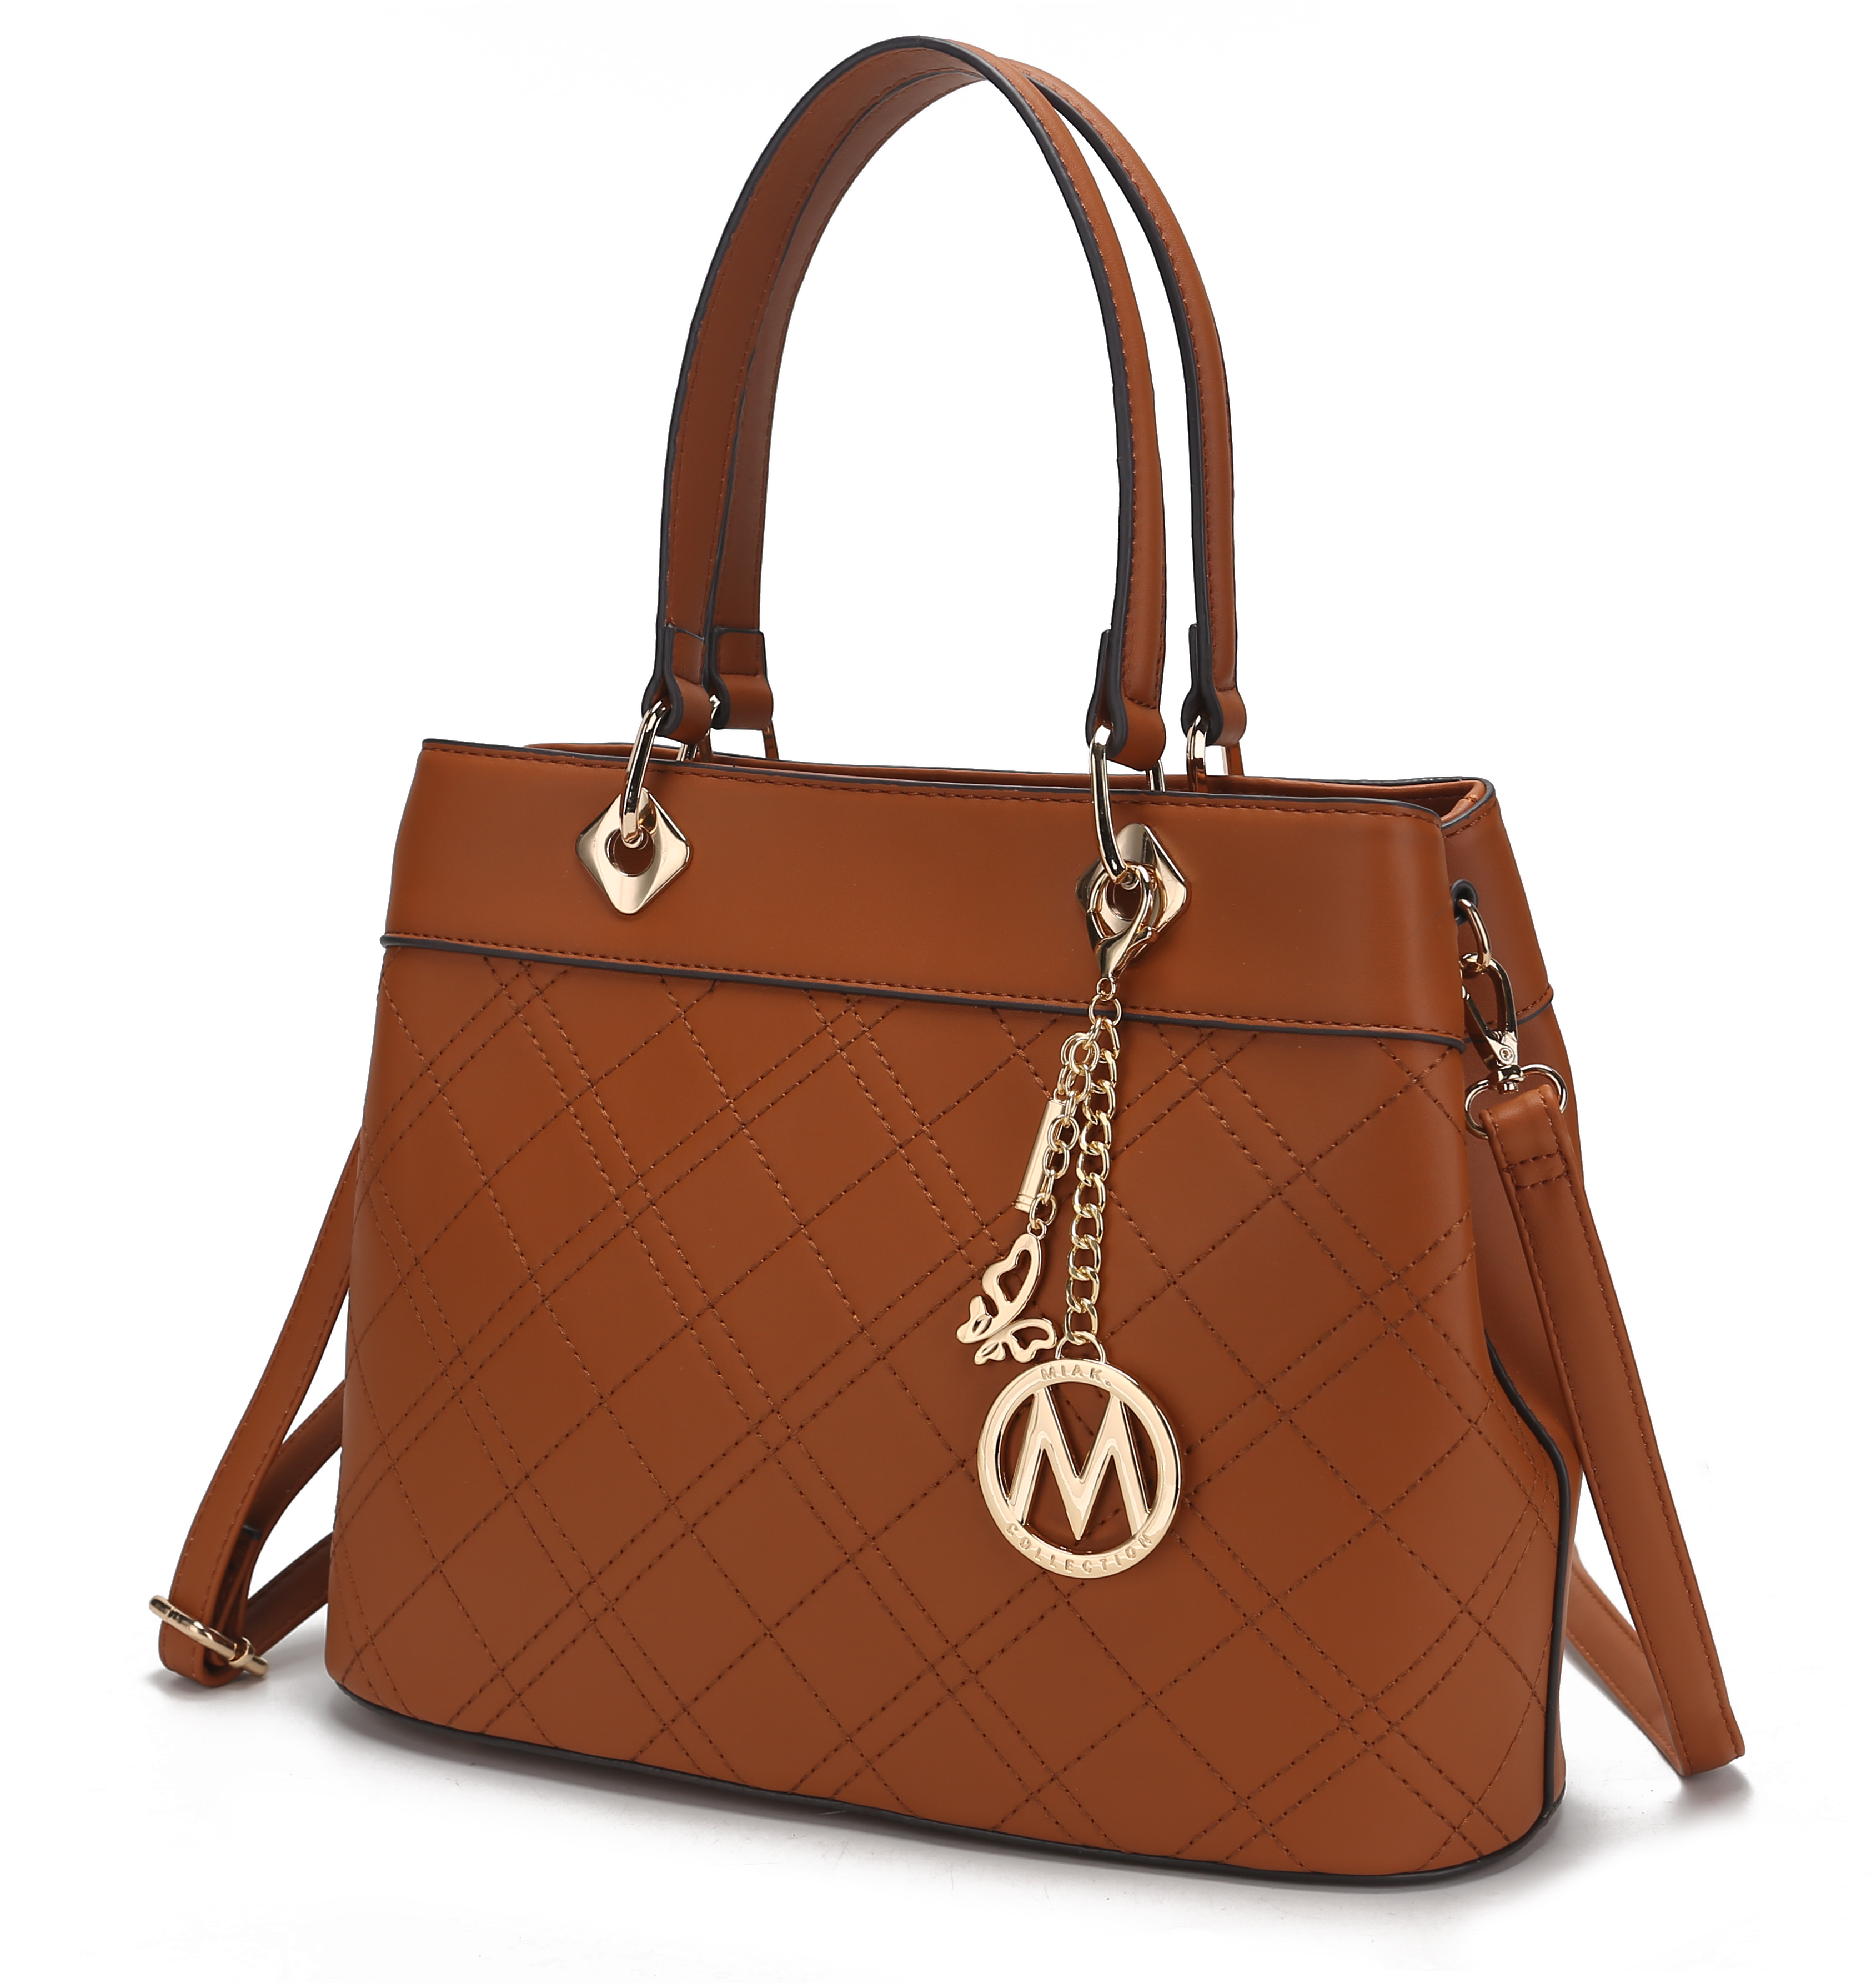 MKF Collection by Mia K. Fantasia Satchel Bag - image 1 of 5